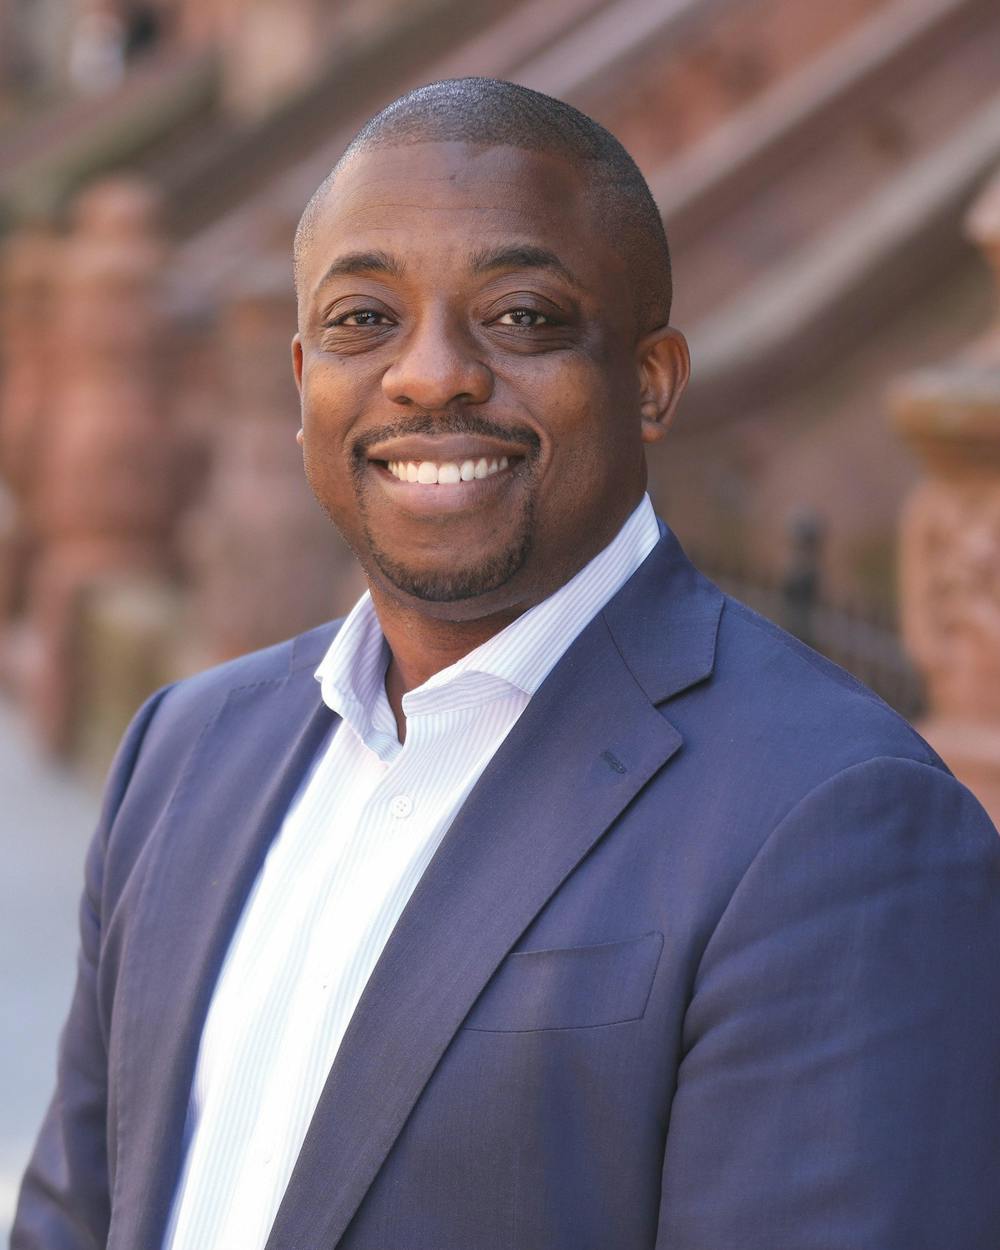 <p>Brian Benjamin ’98 served as senior class president. Roommate Mike Young &#x27;98 attested to his “very thoughtful and inclusive” character.</p>